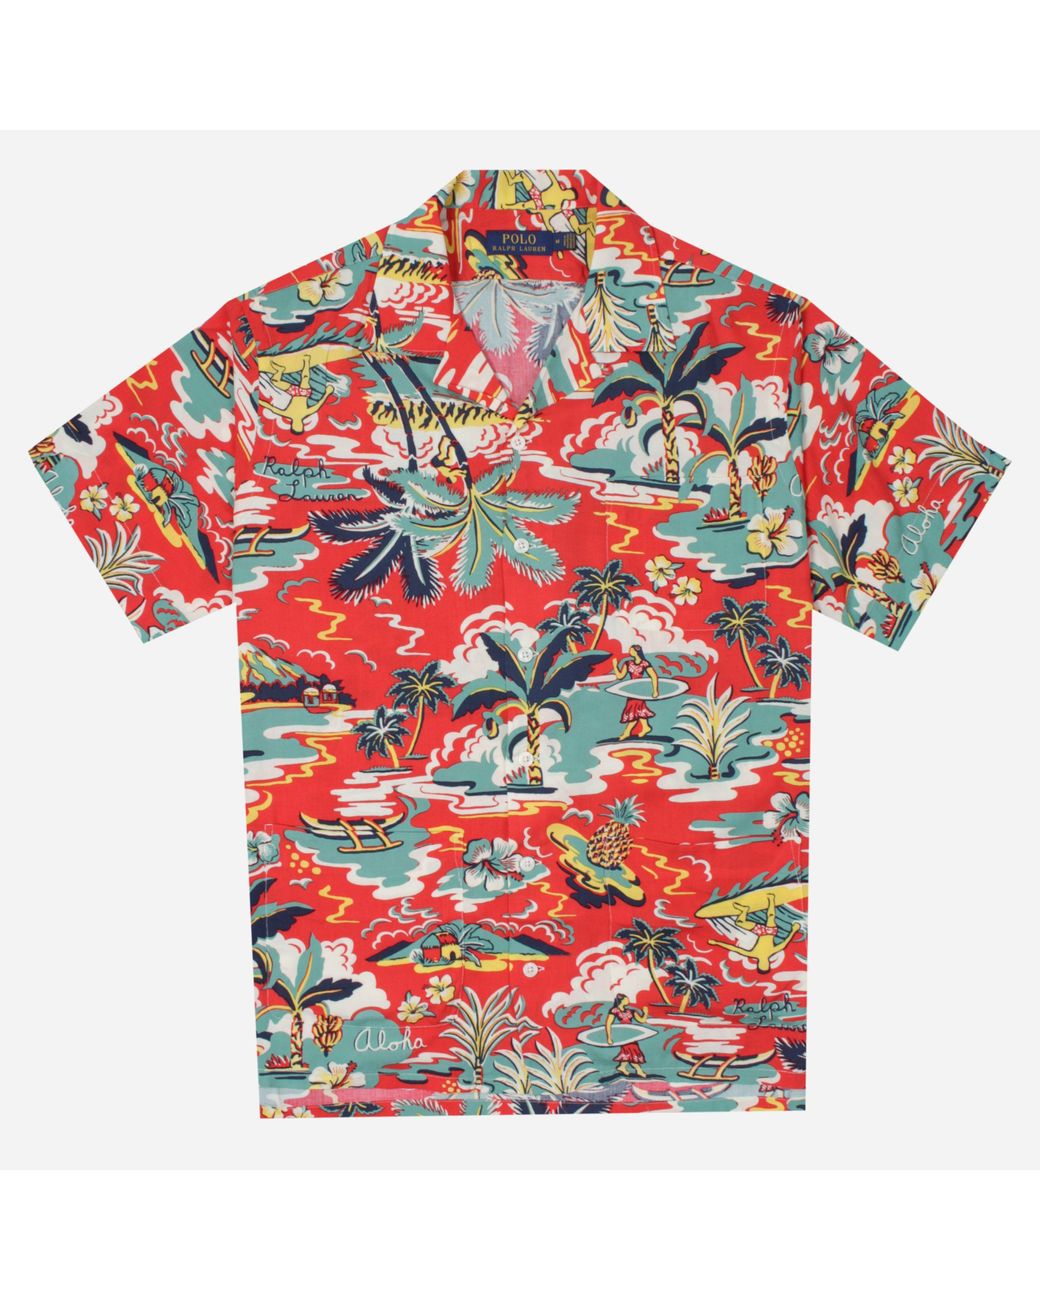 Polo Ralph Lauren Short Sleeve Vintage Palm Vacation Shirt in Red 